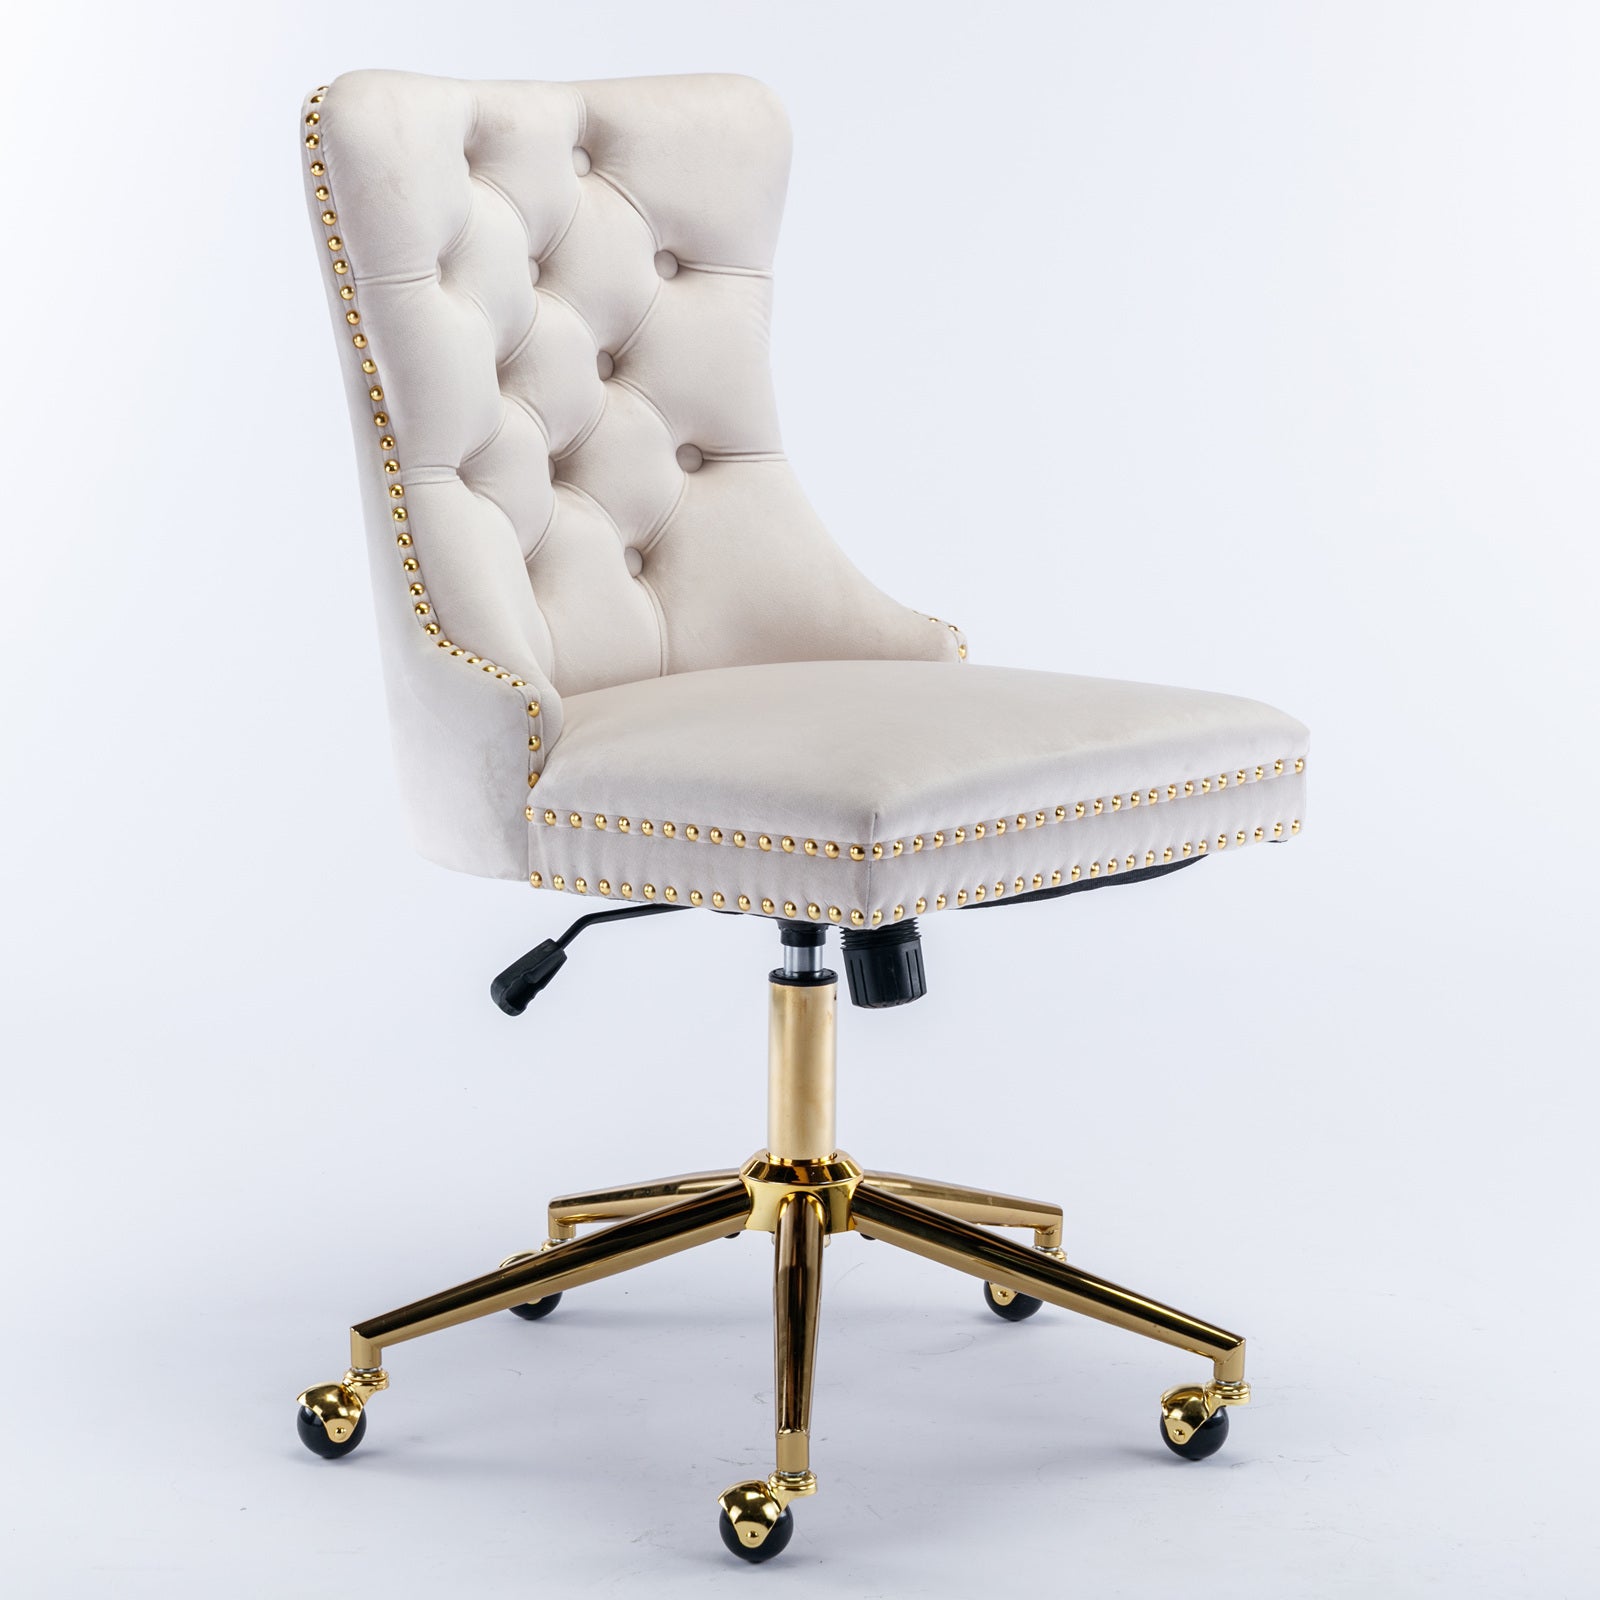 Velvet Upholstered Tufted Button Home Office Chair with Golden Metal Base - Beige